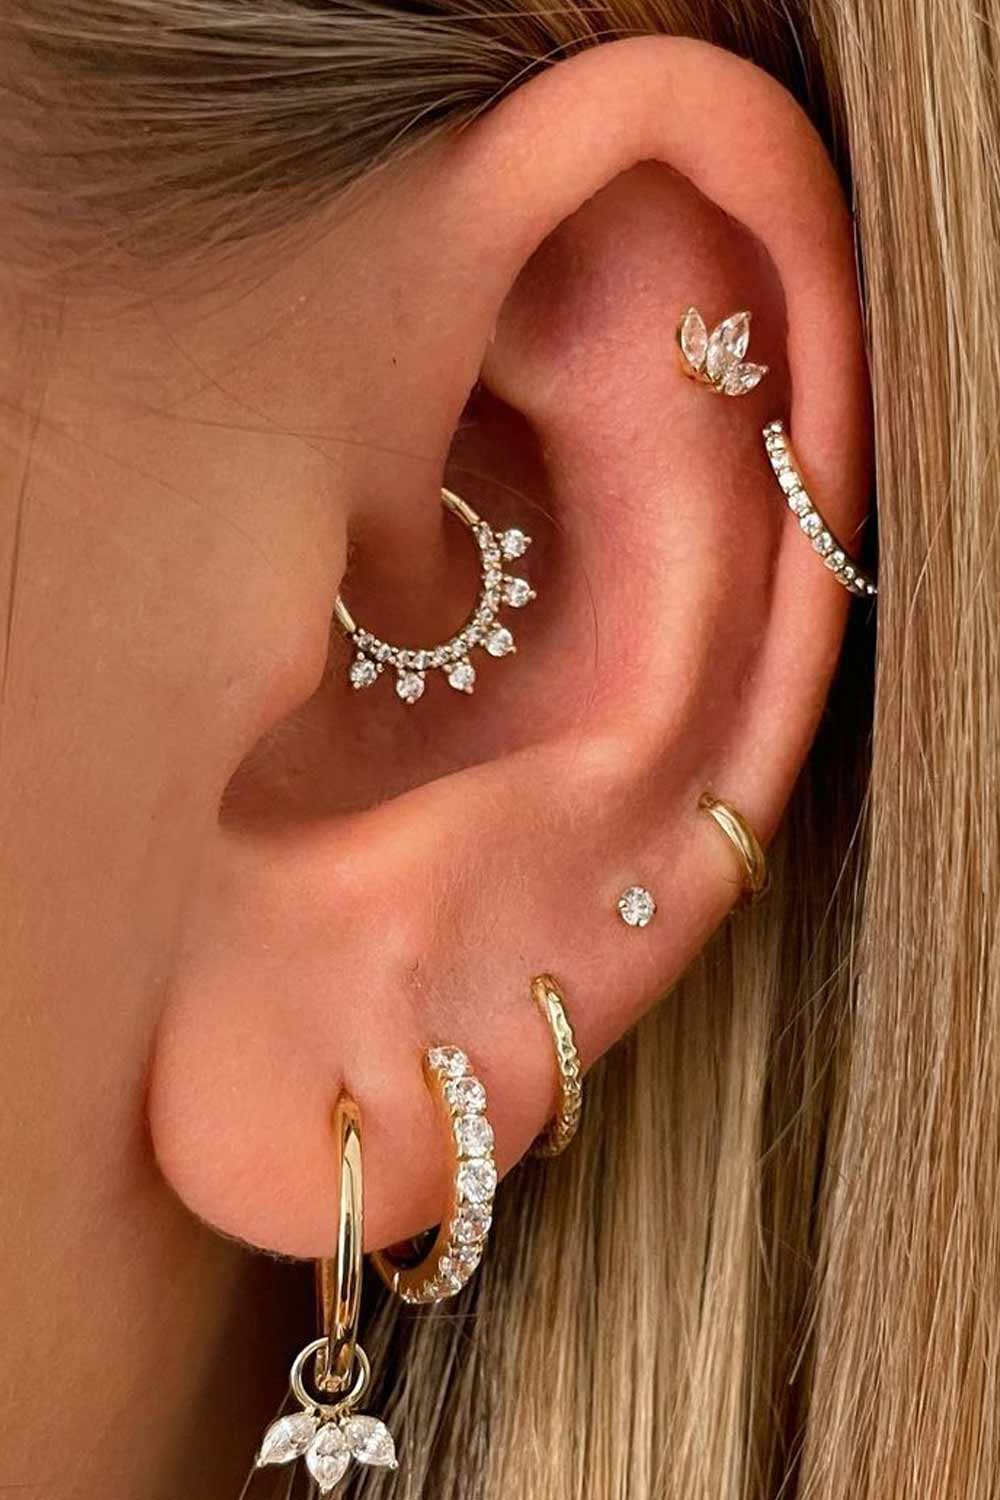 Facts about Daith Piercing